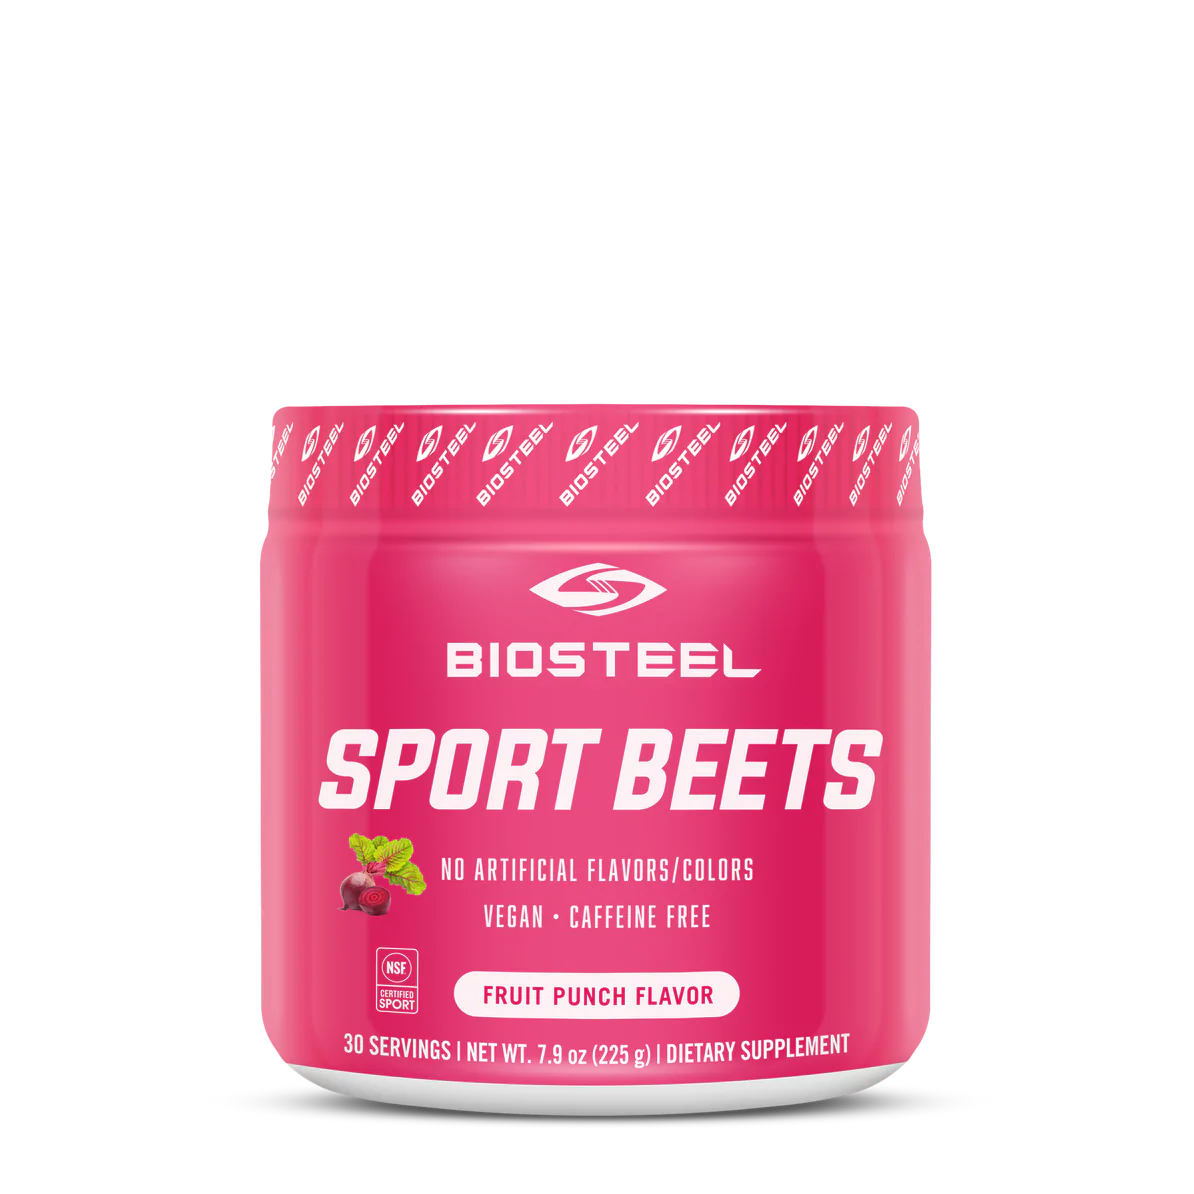 Sports beets Pre-Workout / Fruit punch - 30 meric